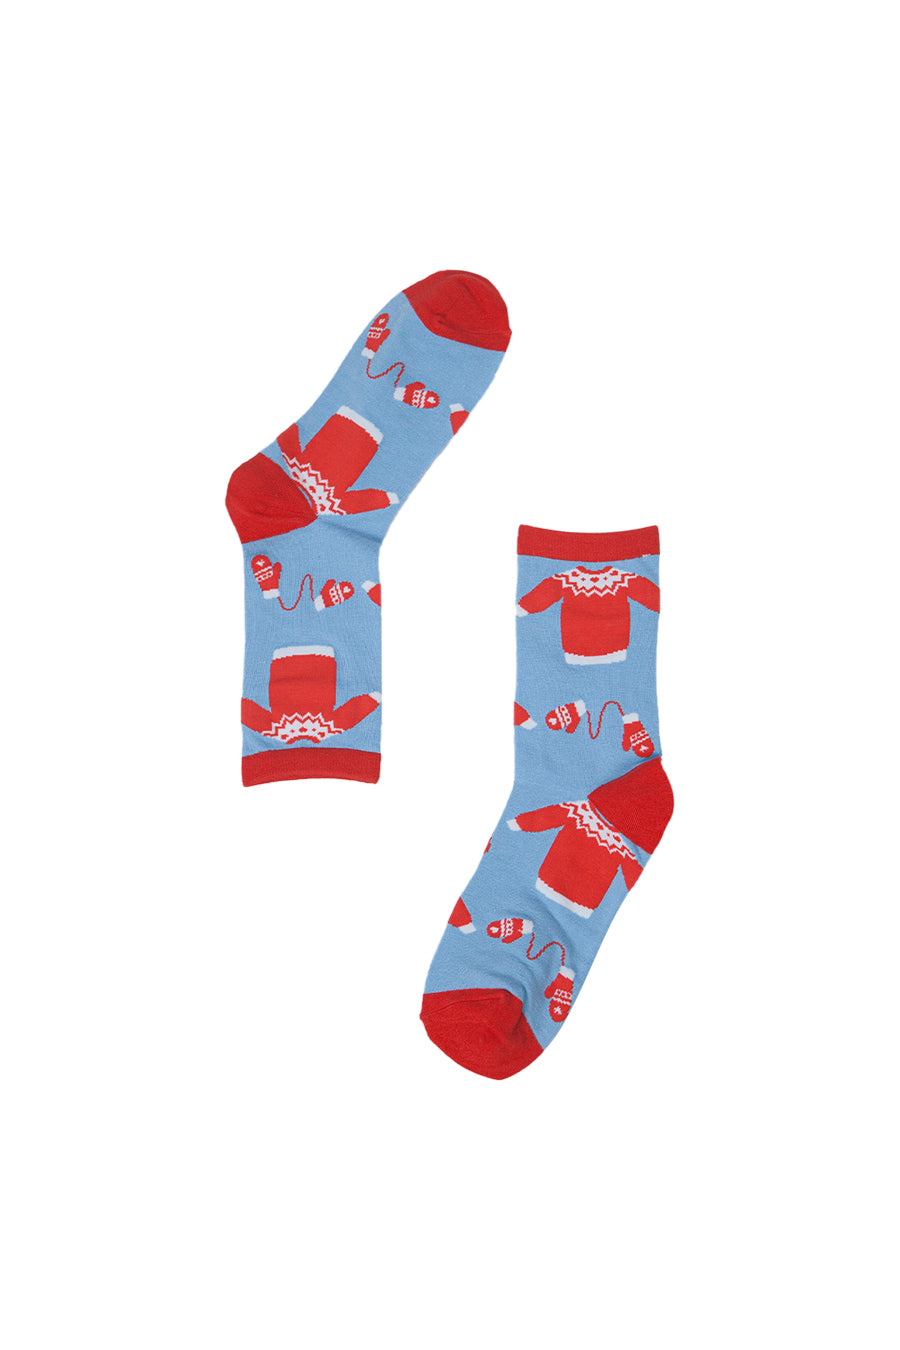 blue bamboo socks featuring red and white Christmas Sweaters